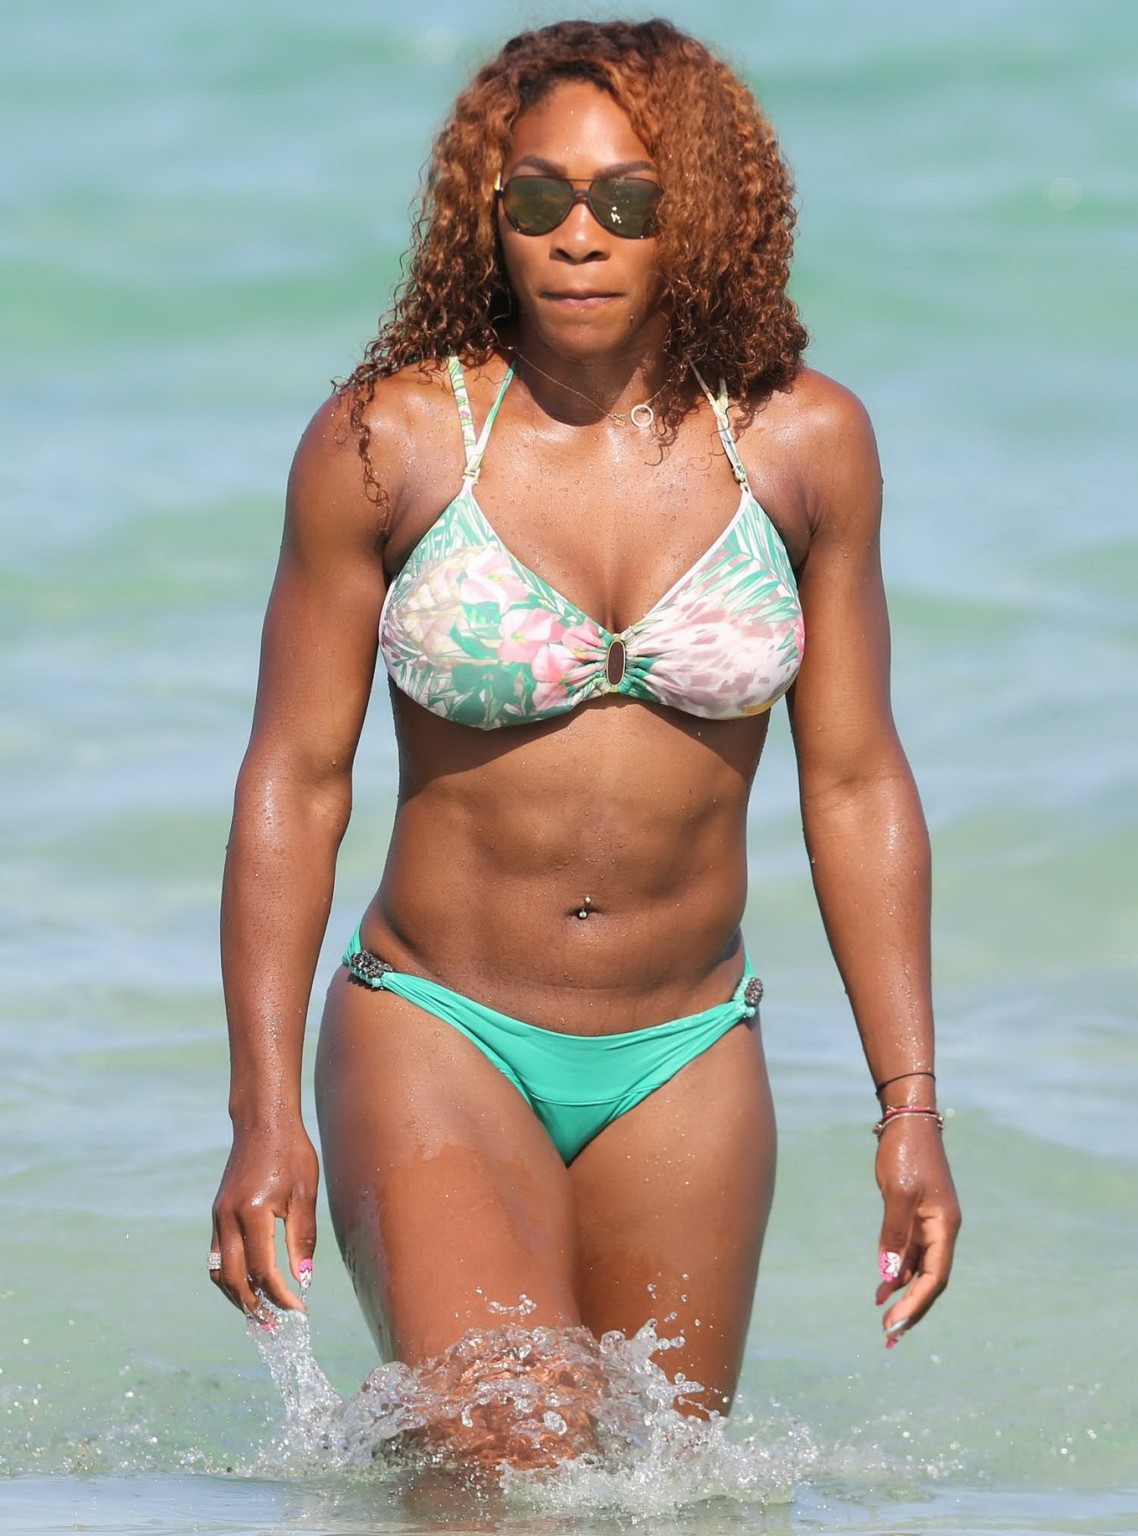 Serena Williams showing off her bikini curves at the beach in Miami #75228670